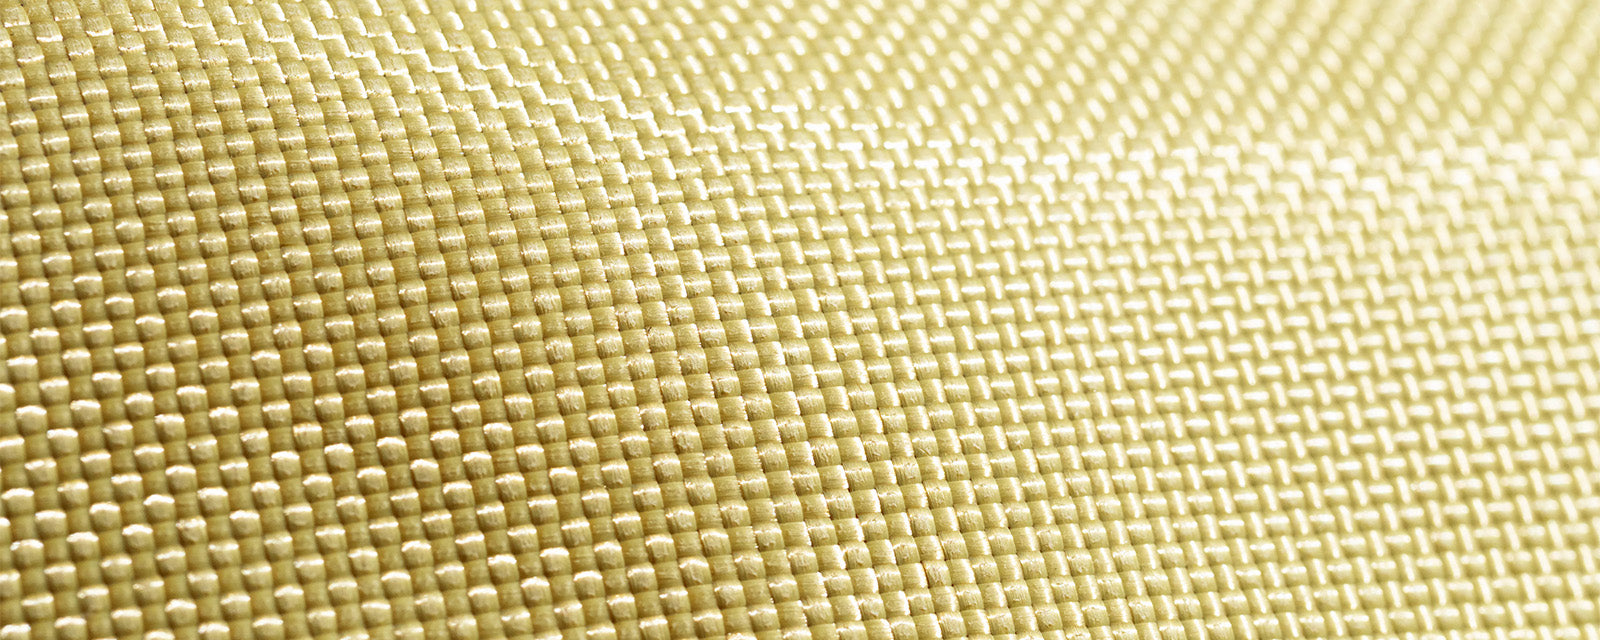 Aramid Kevlar Lining for Motorcycle safety gear products